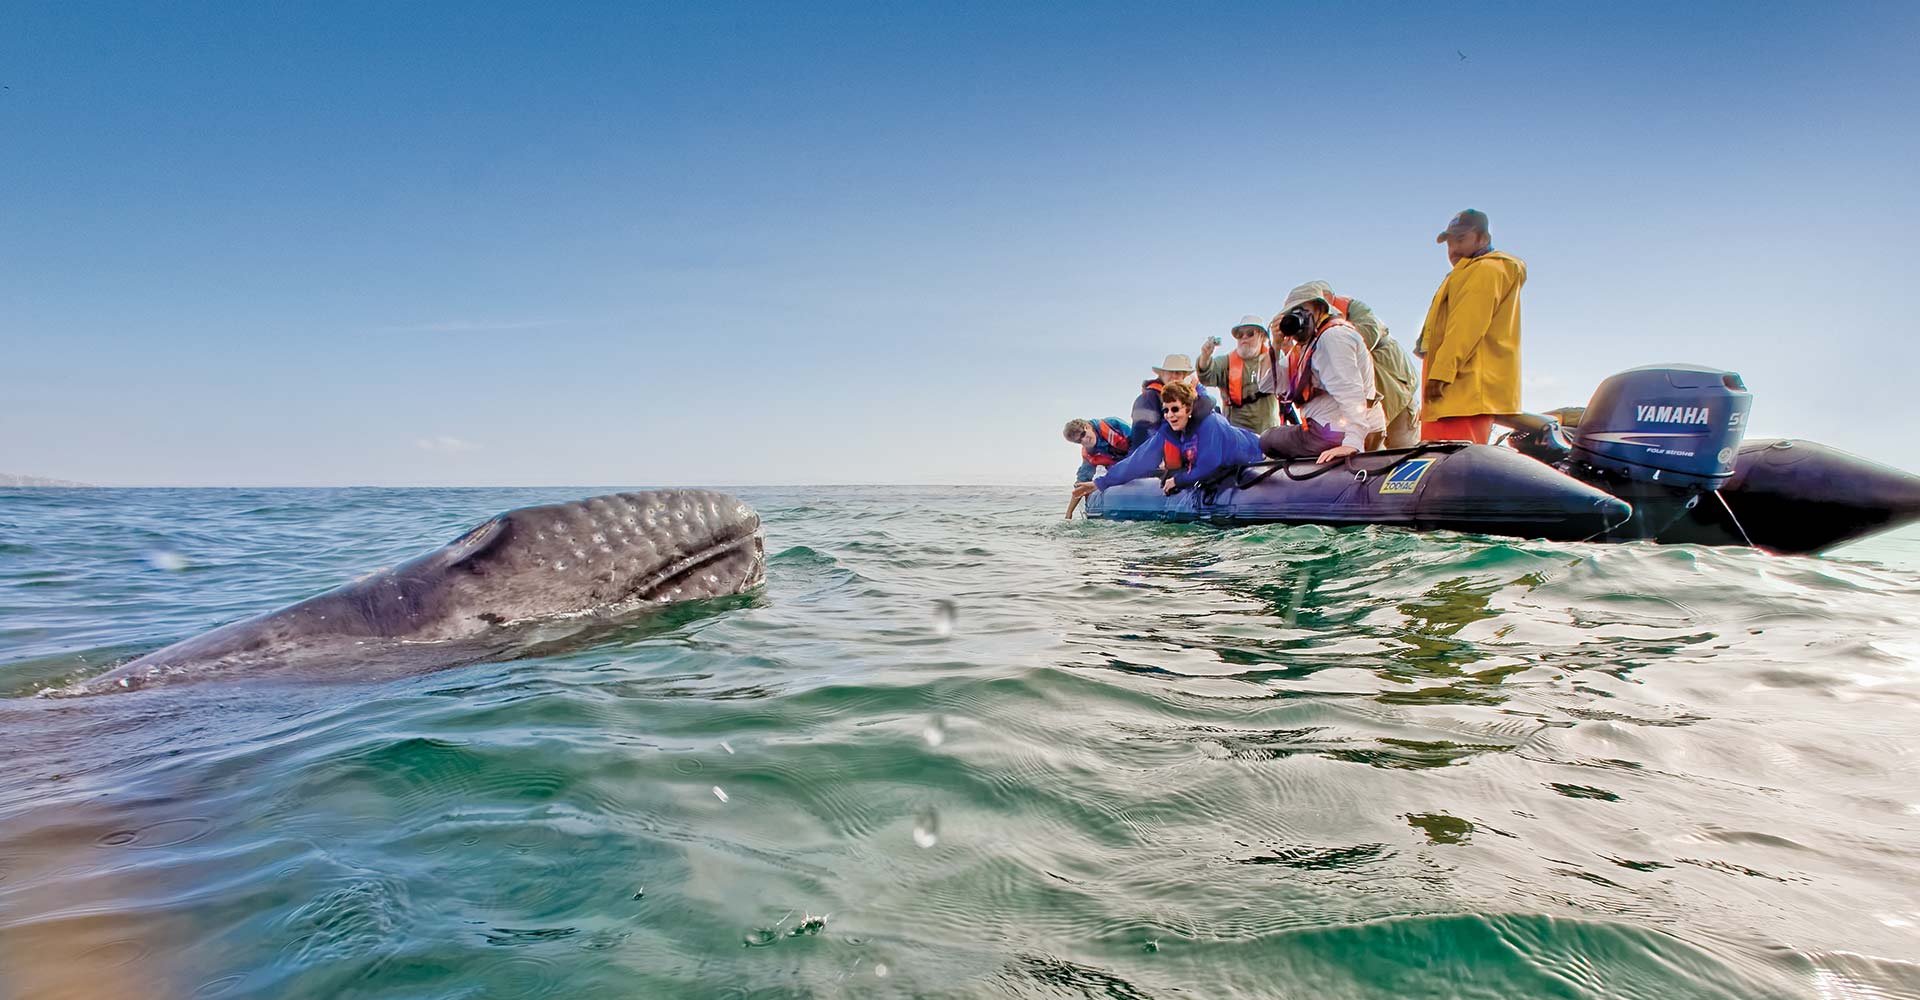 Upclose encounter with gray whales